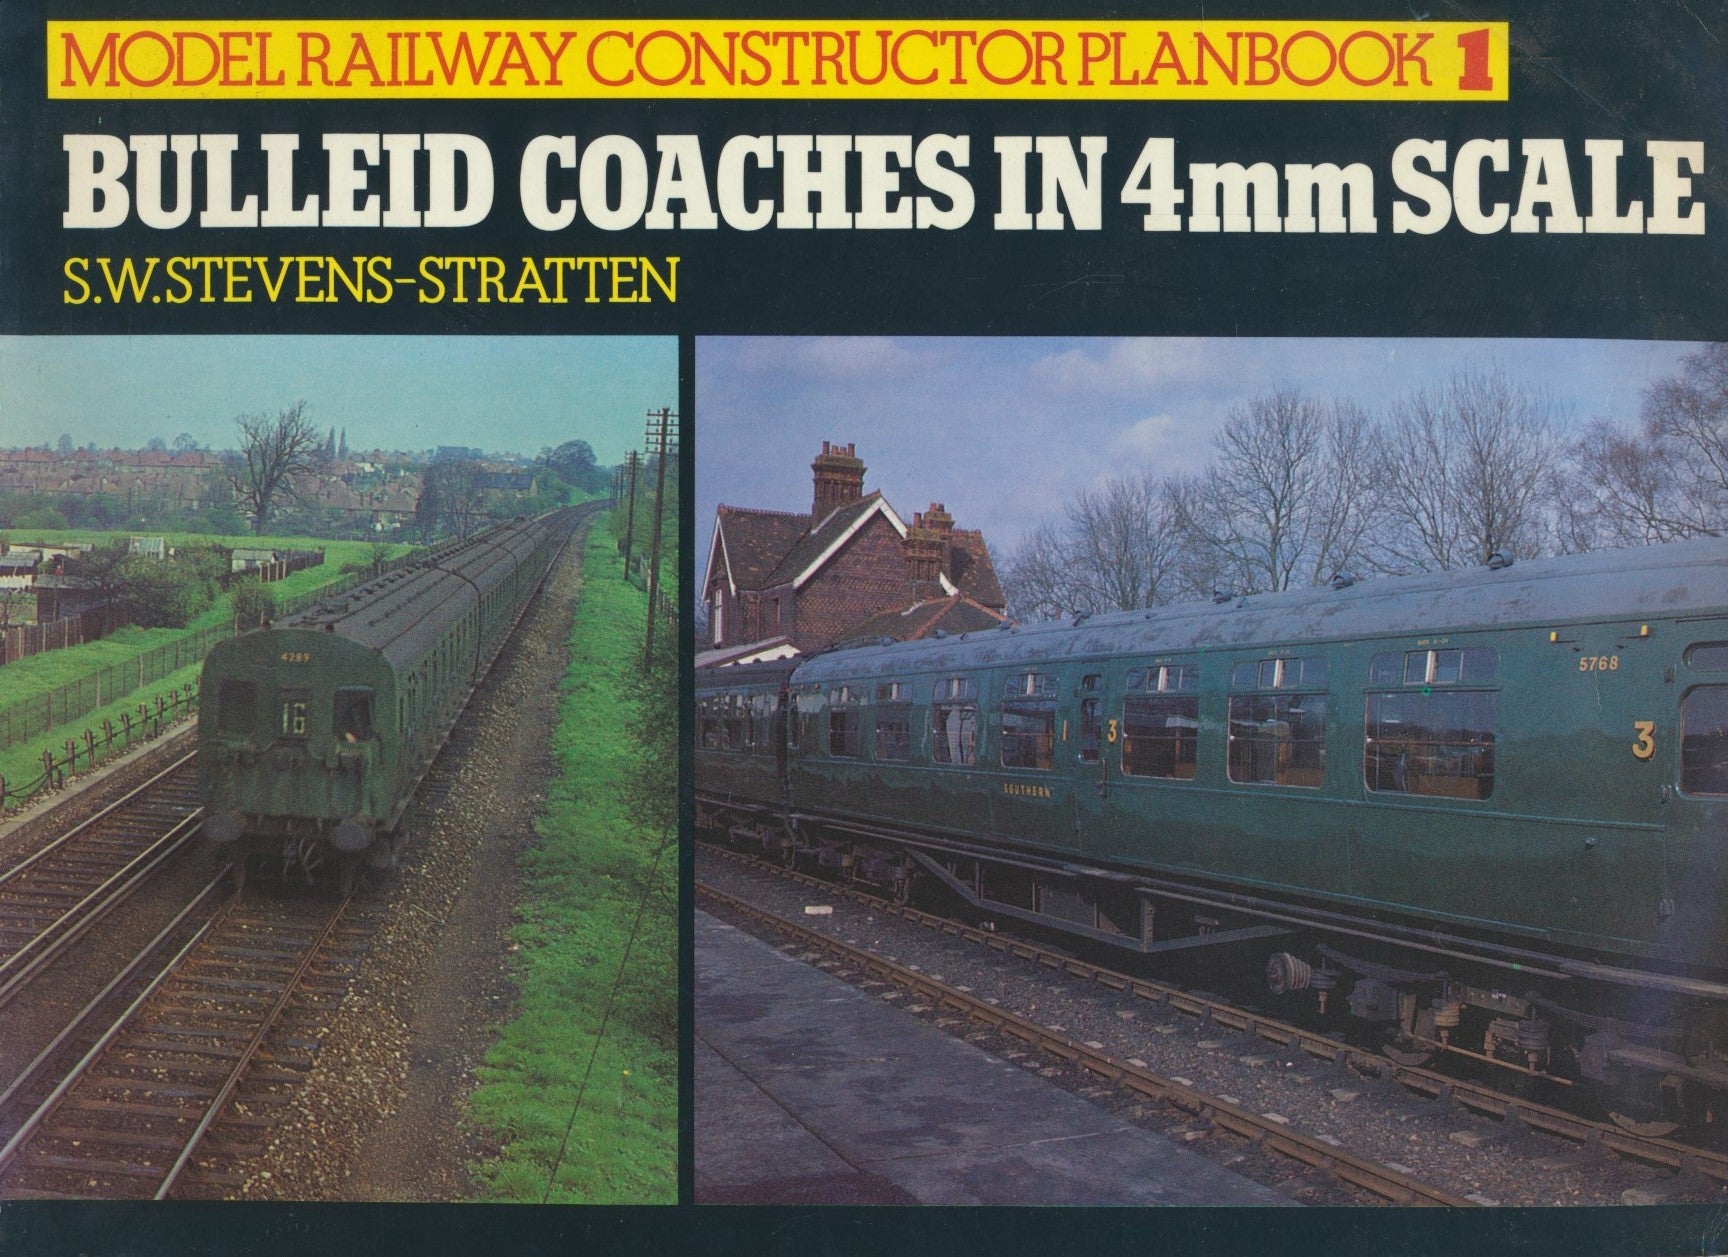 Bulleid Coaches in 4mm Scale